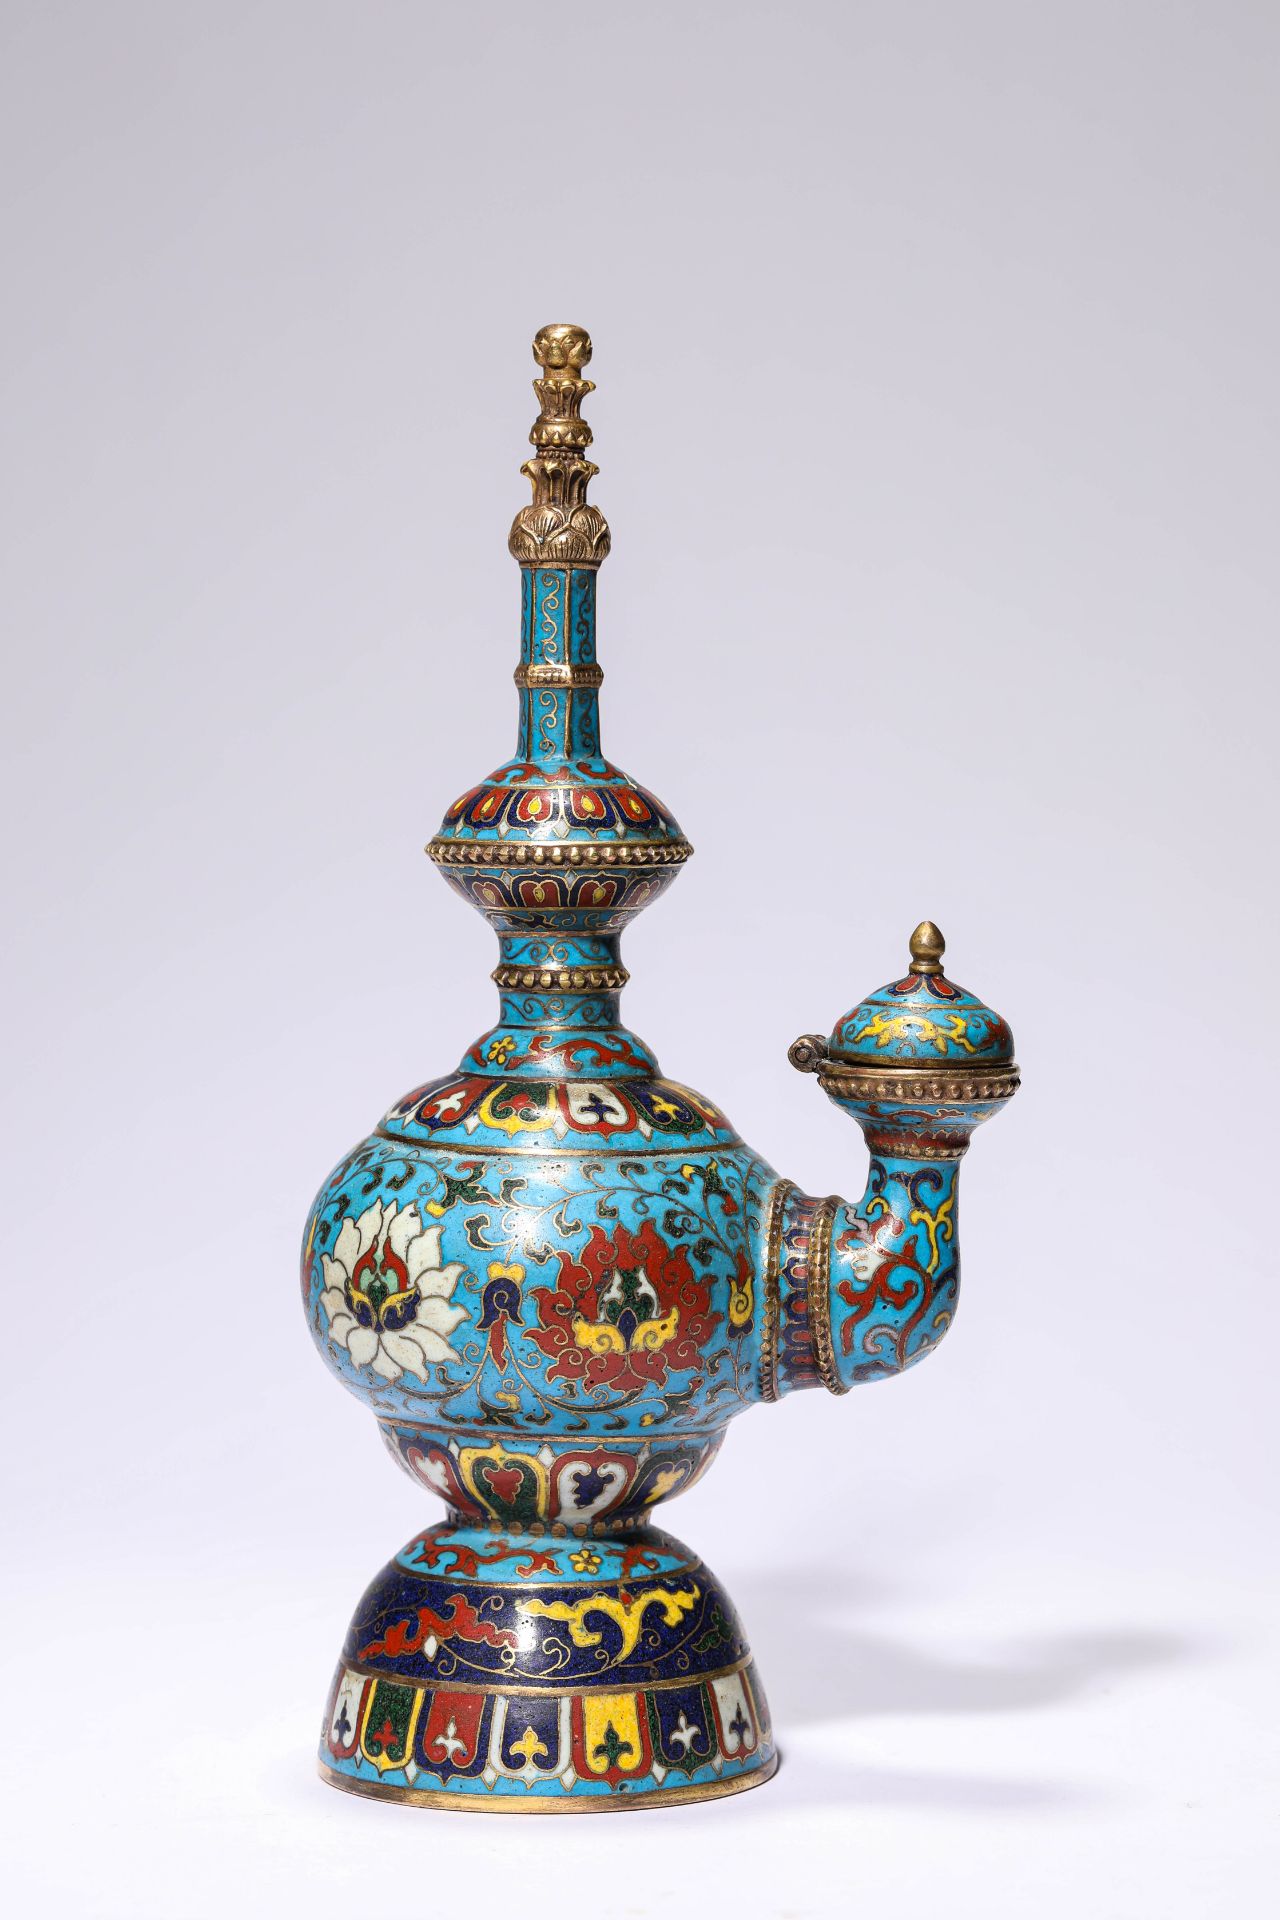 FINE CHINESE CLOISONNE, 17TH/18TH Century Pr.  Collection of NARA private gallary.  - Image 3 of 6